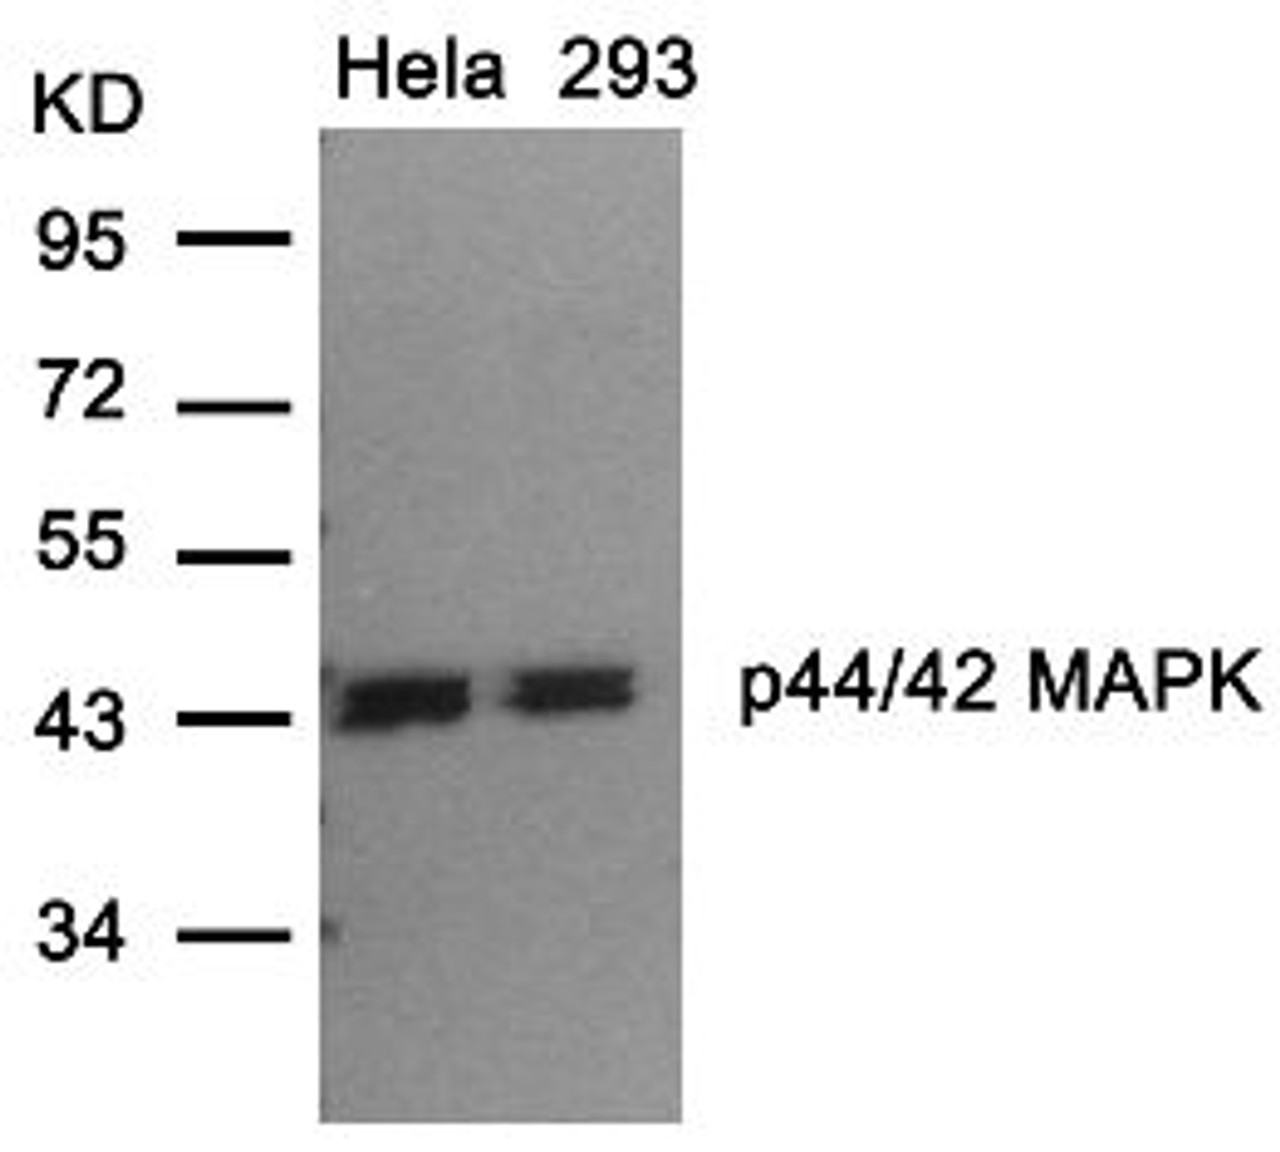 Western blot analysis of lysed extracts from HeLa and 293 cells using p44/42 MAP Kinase (Ab-202) .